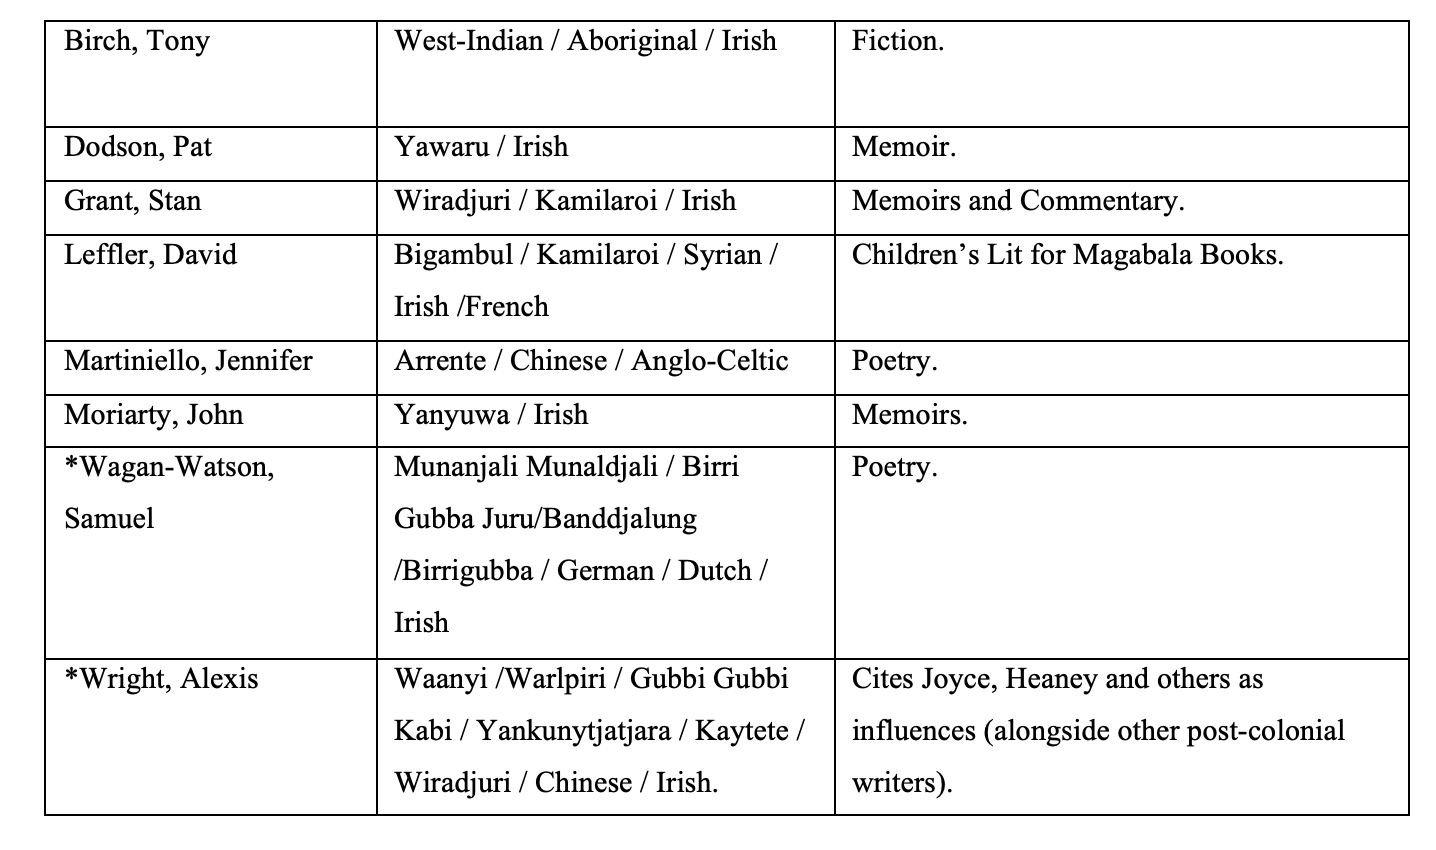 Table 5: Aboriginal Writers Who Claim Irish (or Anglo-Celtic) Descent (among Others)